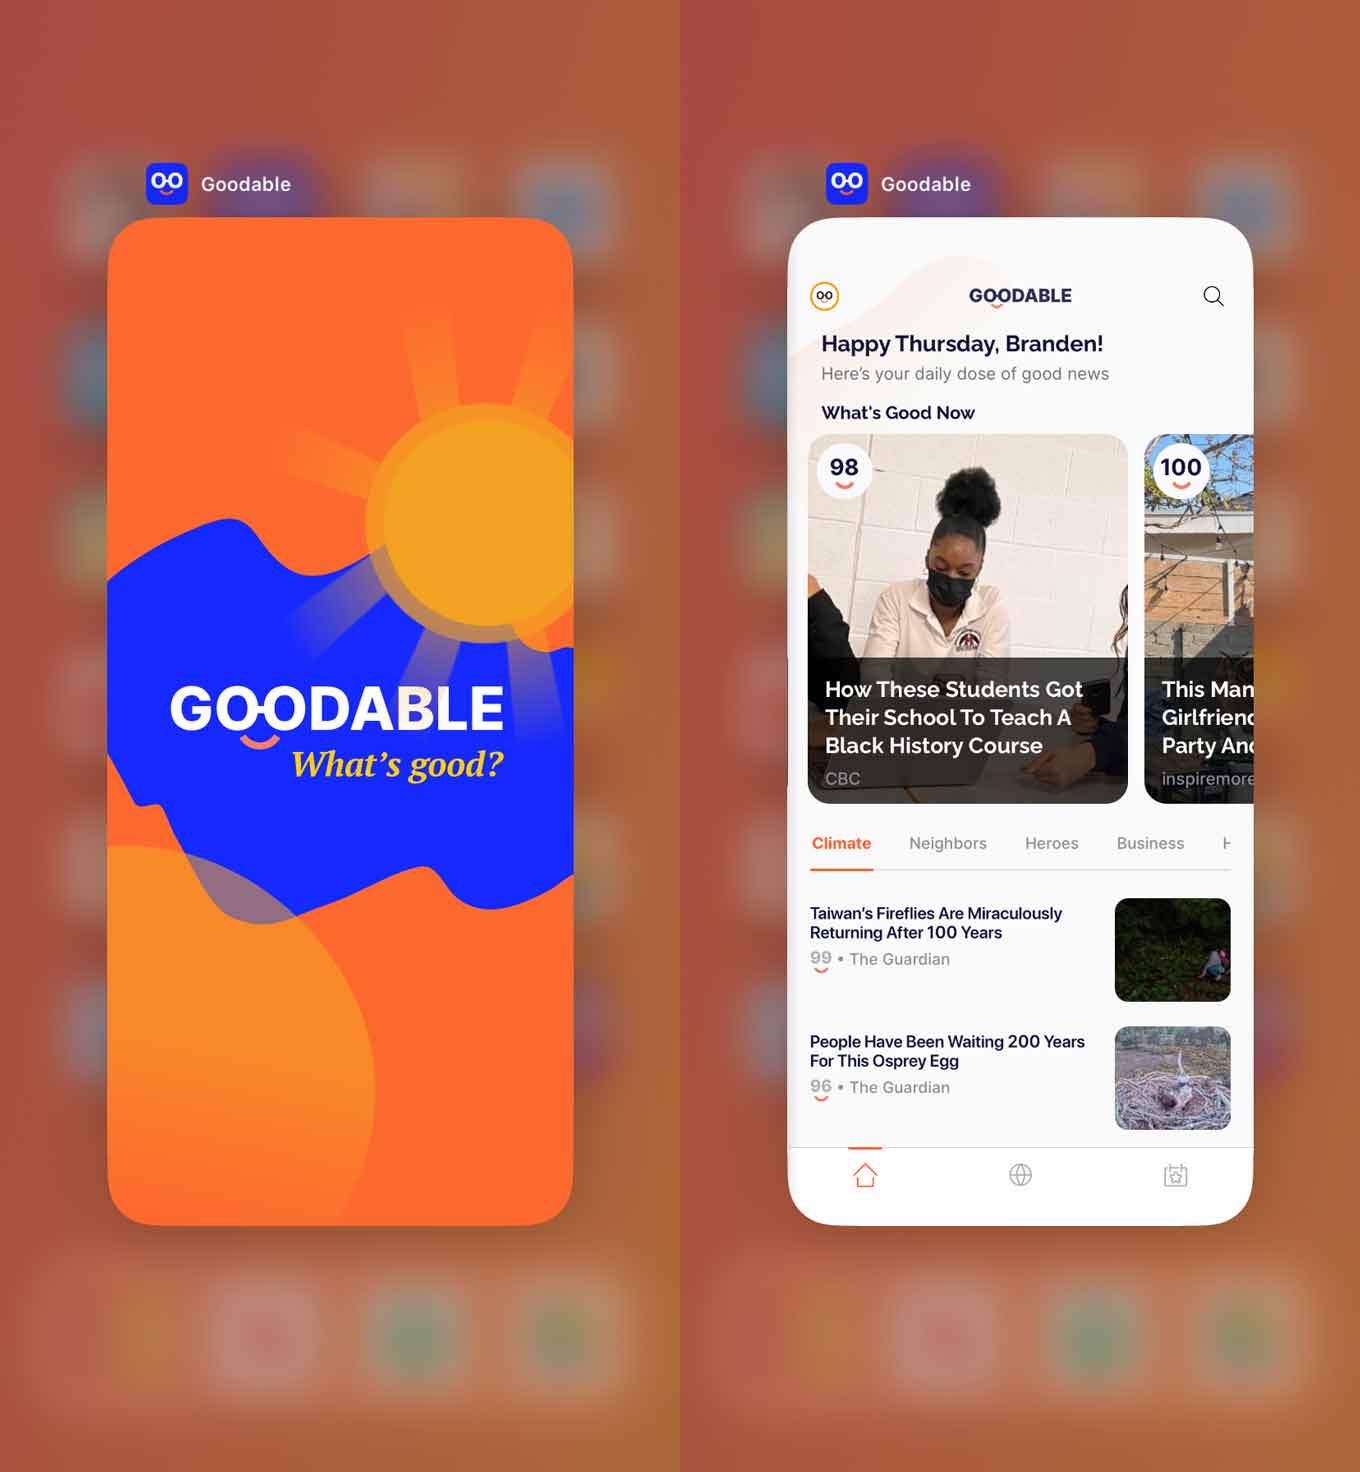 Good News App Goodble, showing the text "What's good" and positive news stories about Climate Change and Black History